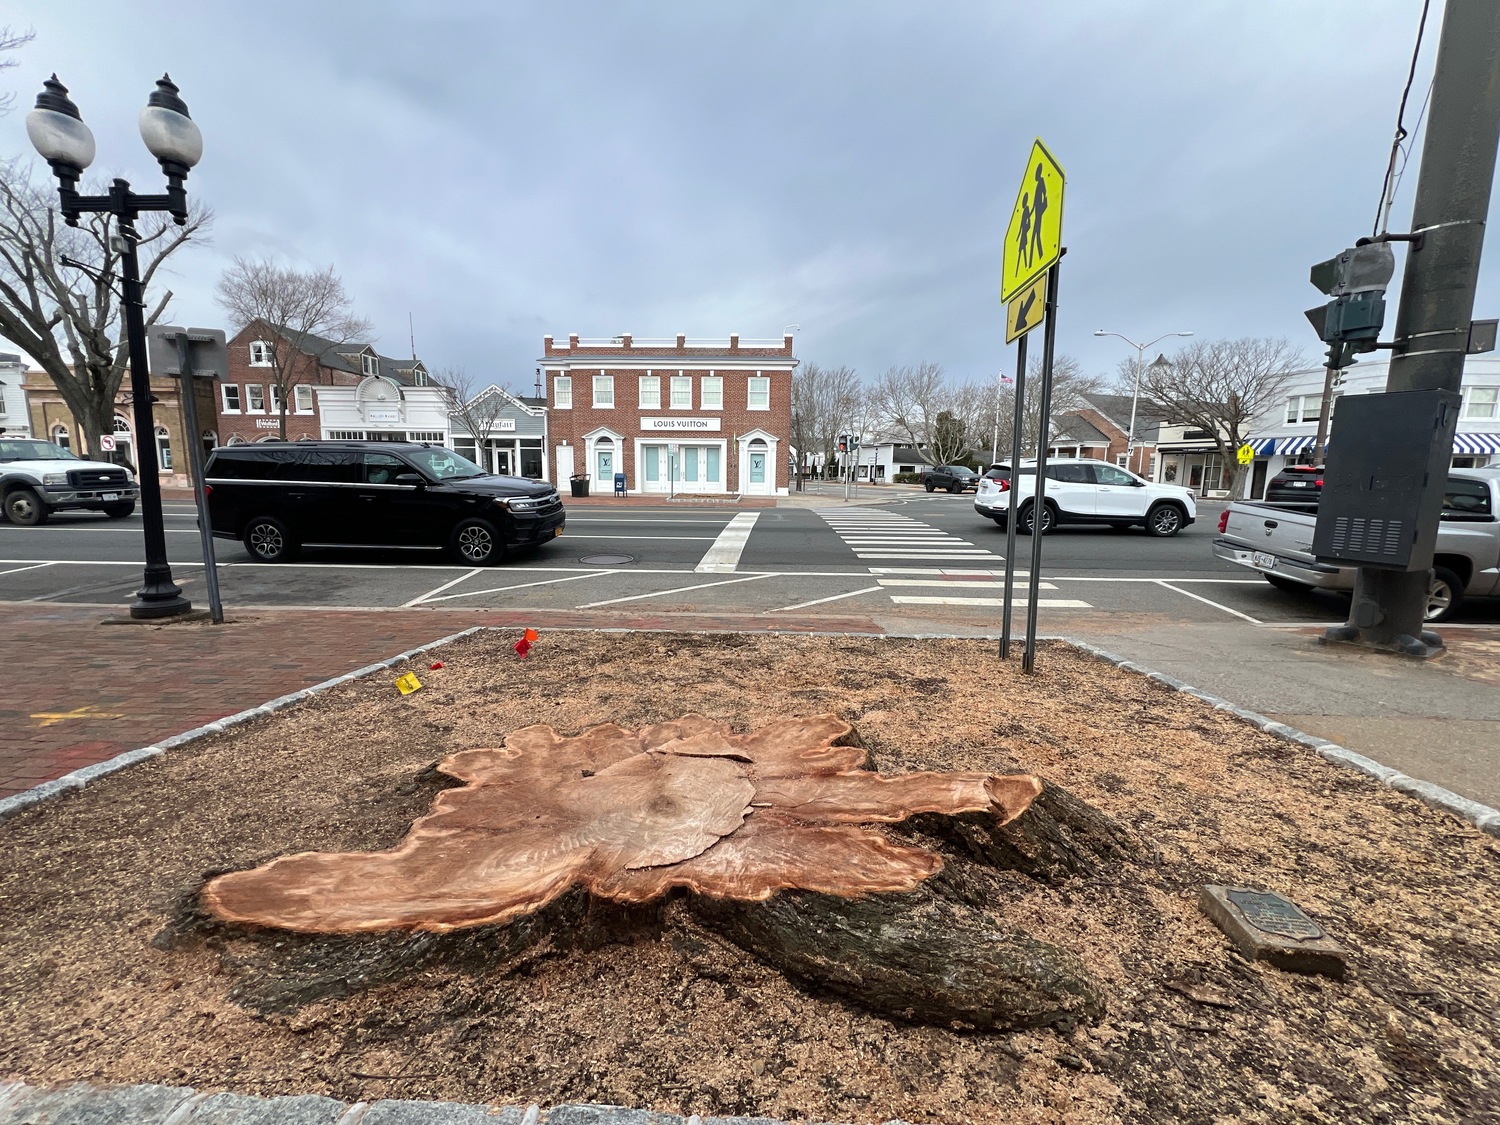 The village will grind out most of the stumps but the massive root systems of the trees will remain. The LVIS said they will figure out if a new tree can be planted in the existing enclosure, or if the enclosures should be relocated to a let a new tree grow unfettered. DOUG KUNTZ